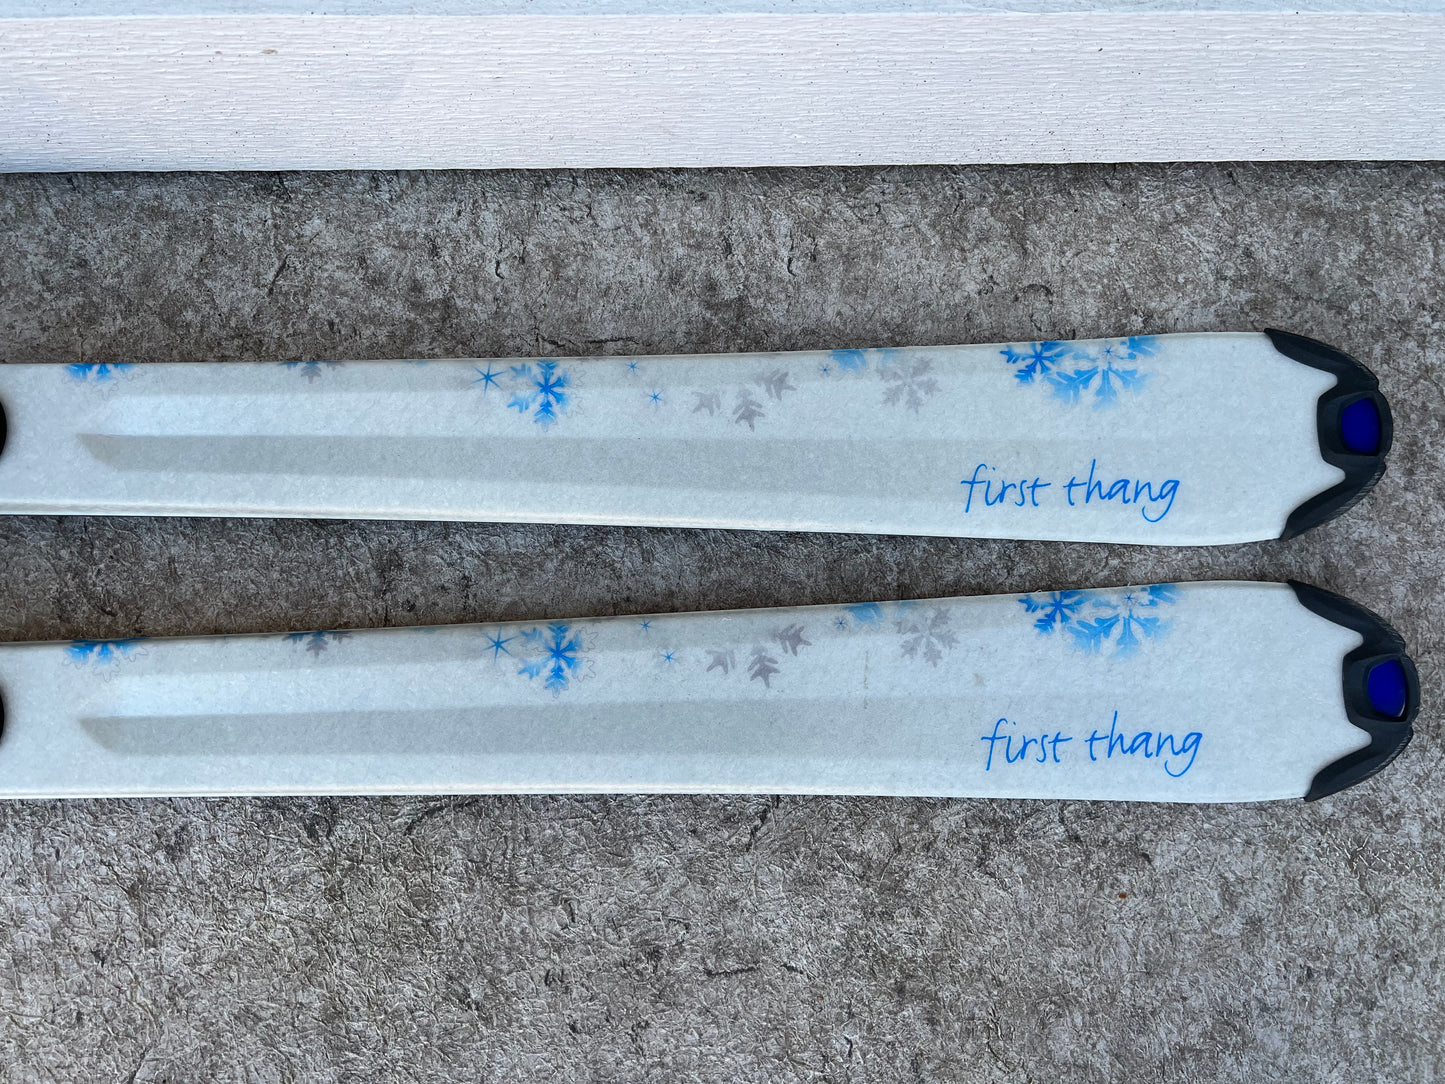 Ski 163 Head First Thing Parabolic Blue Silver Snow Flakes As New With Bindings